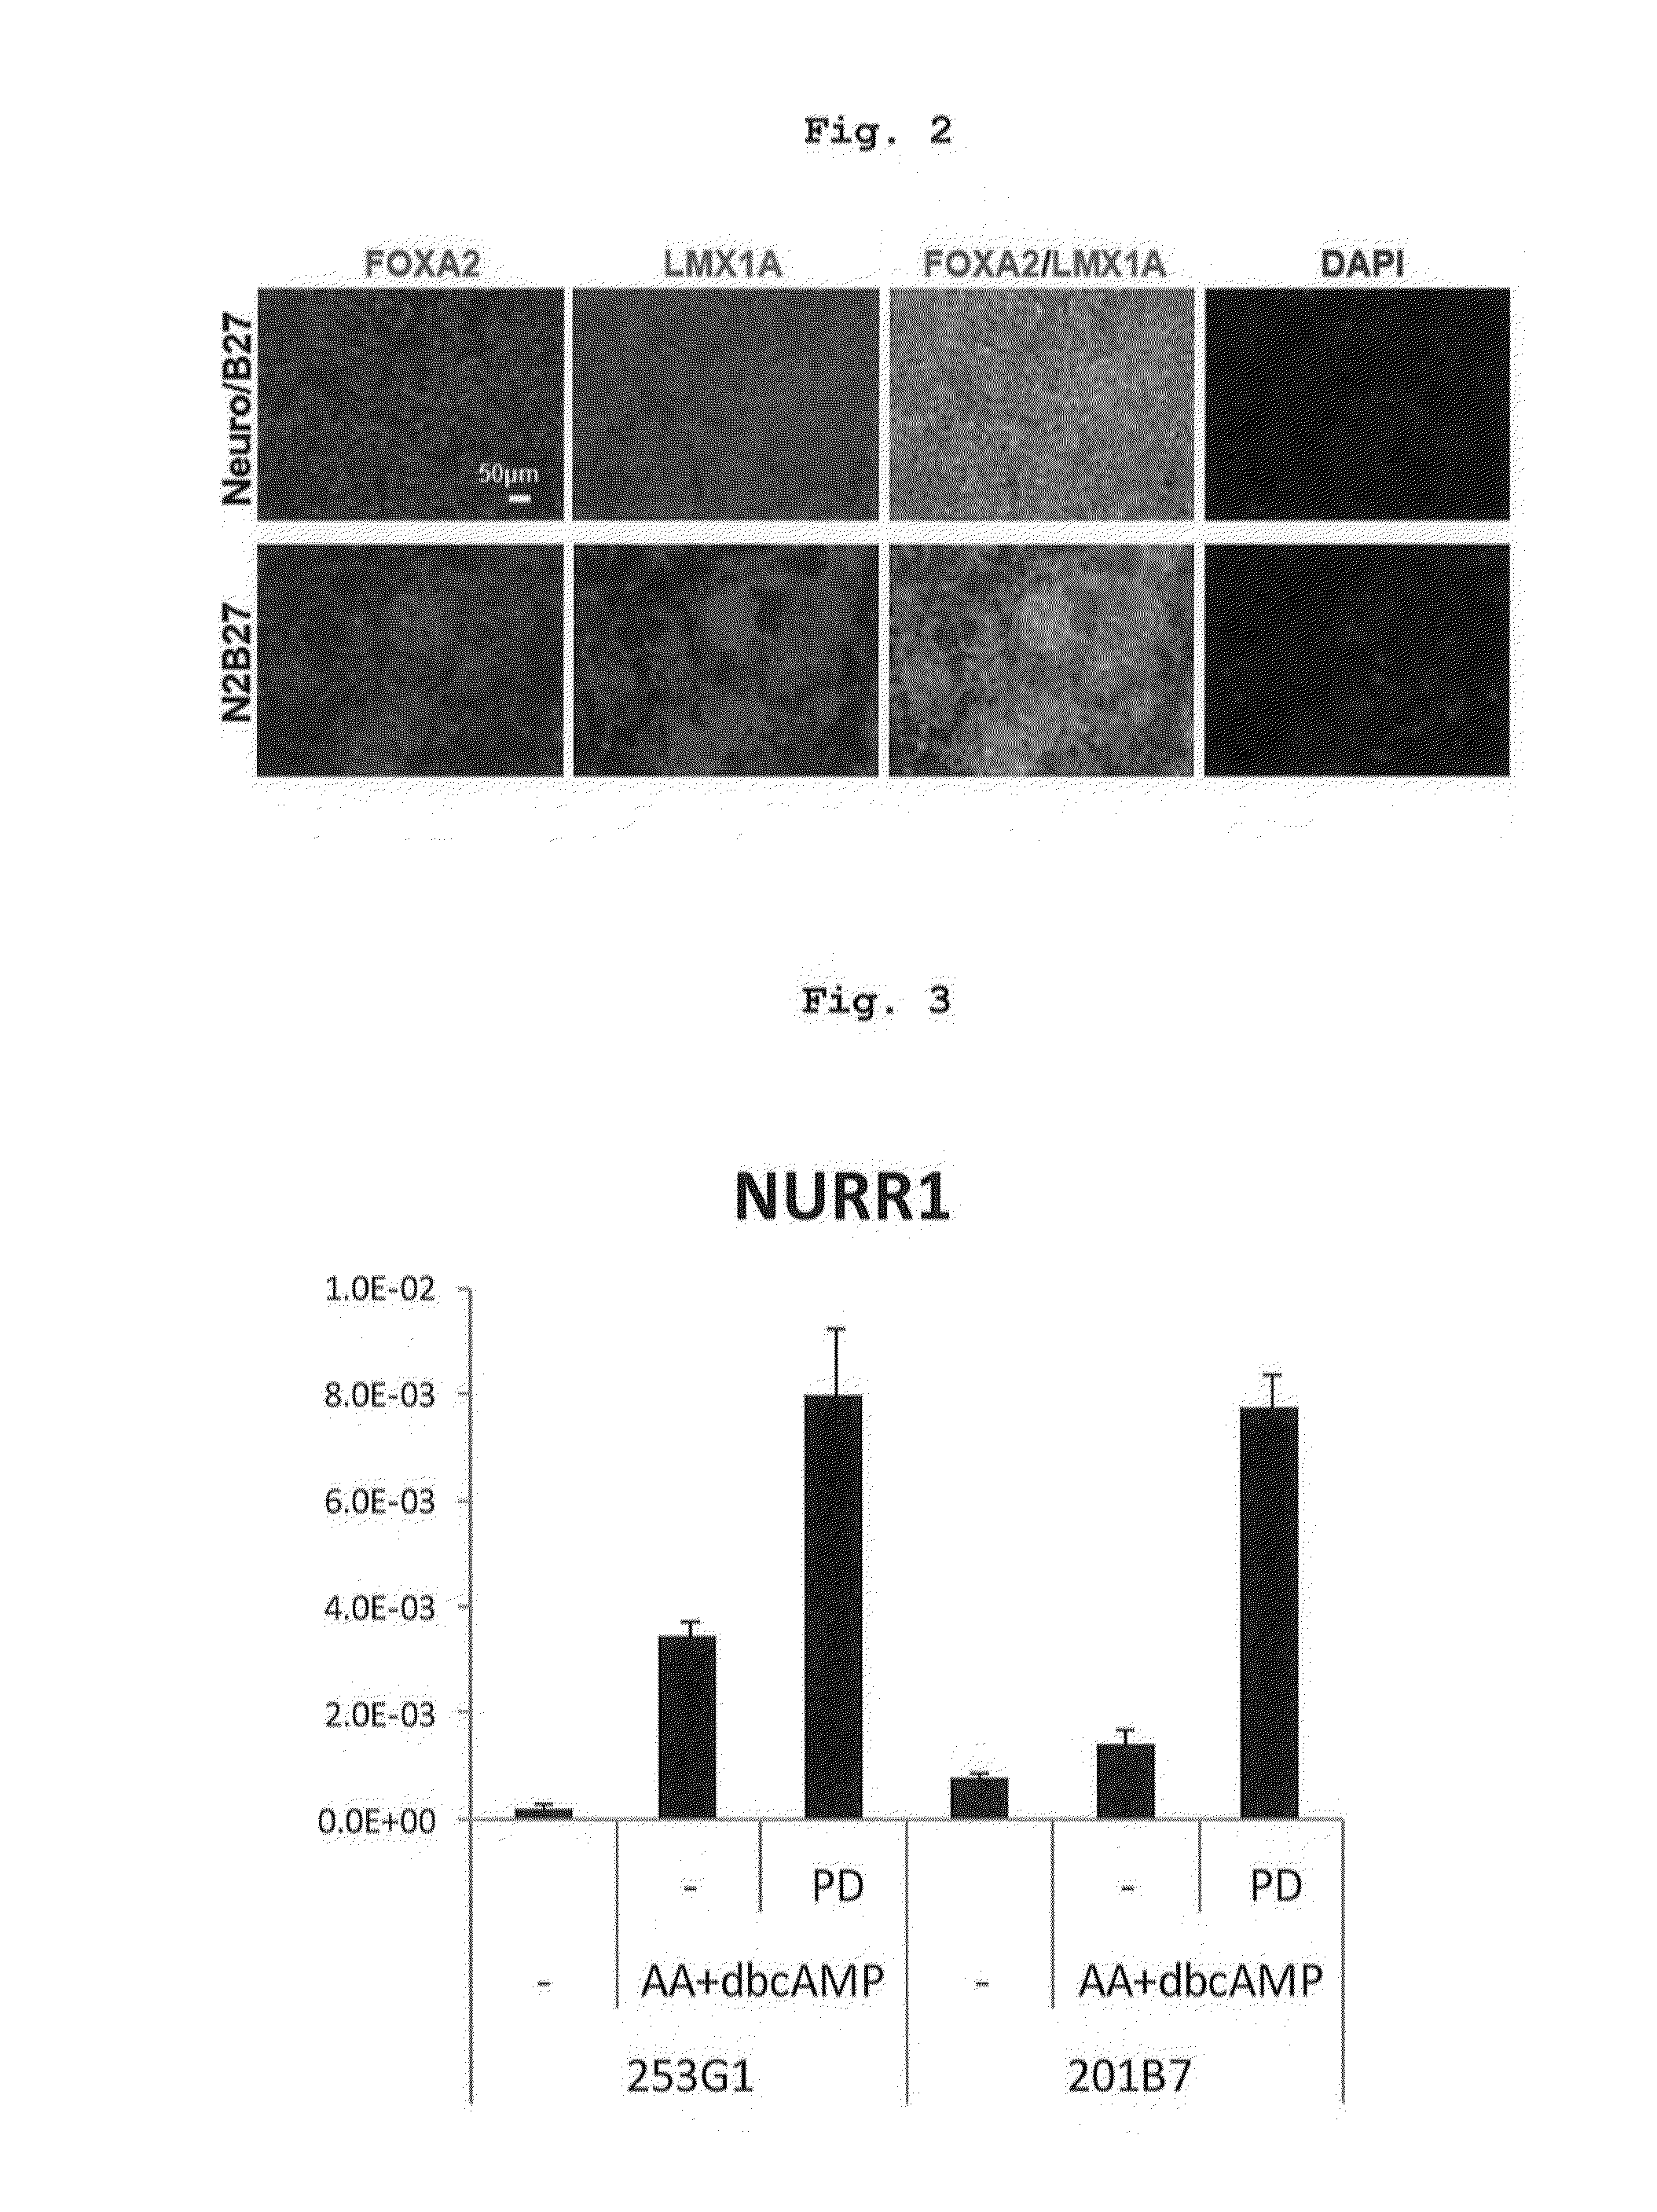 Method for producing dopaminergic neurons